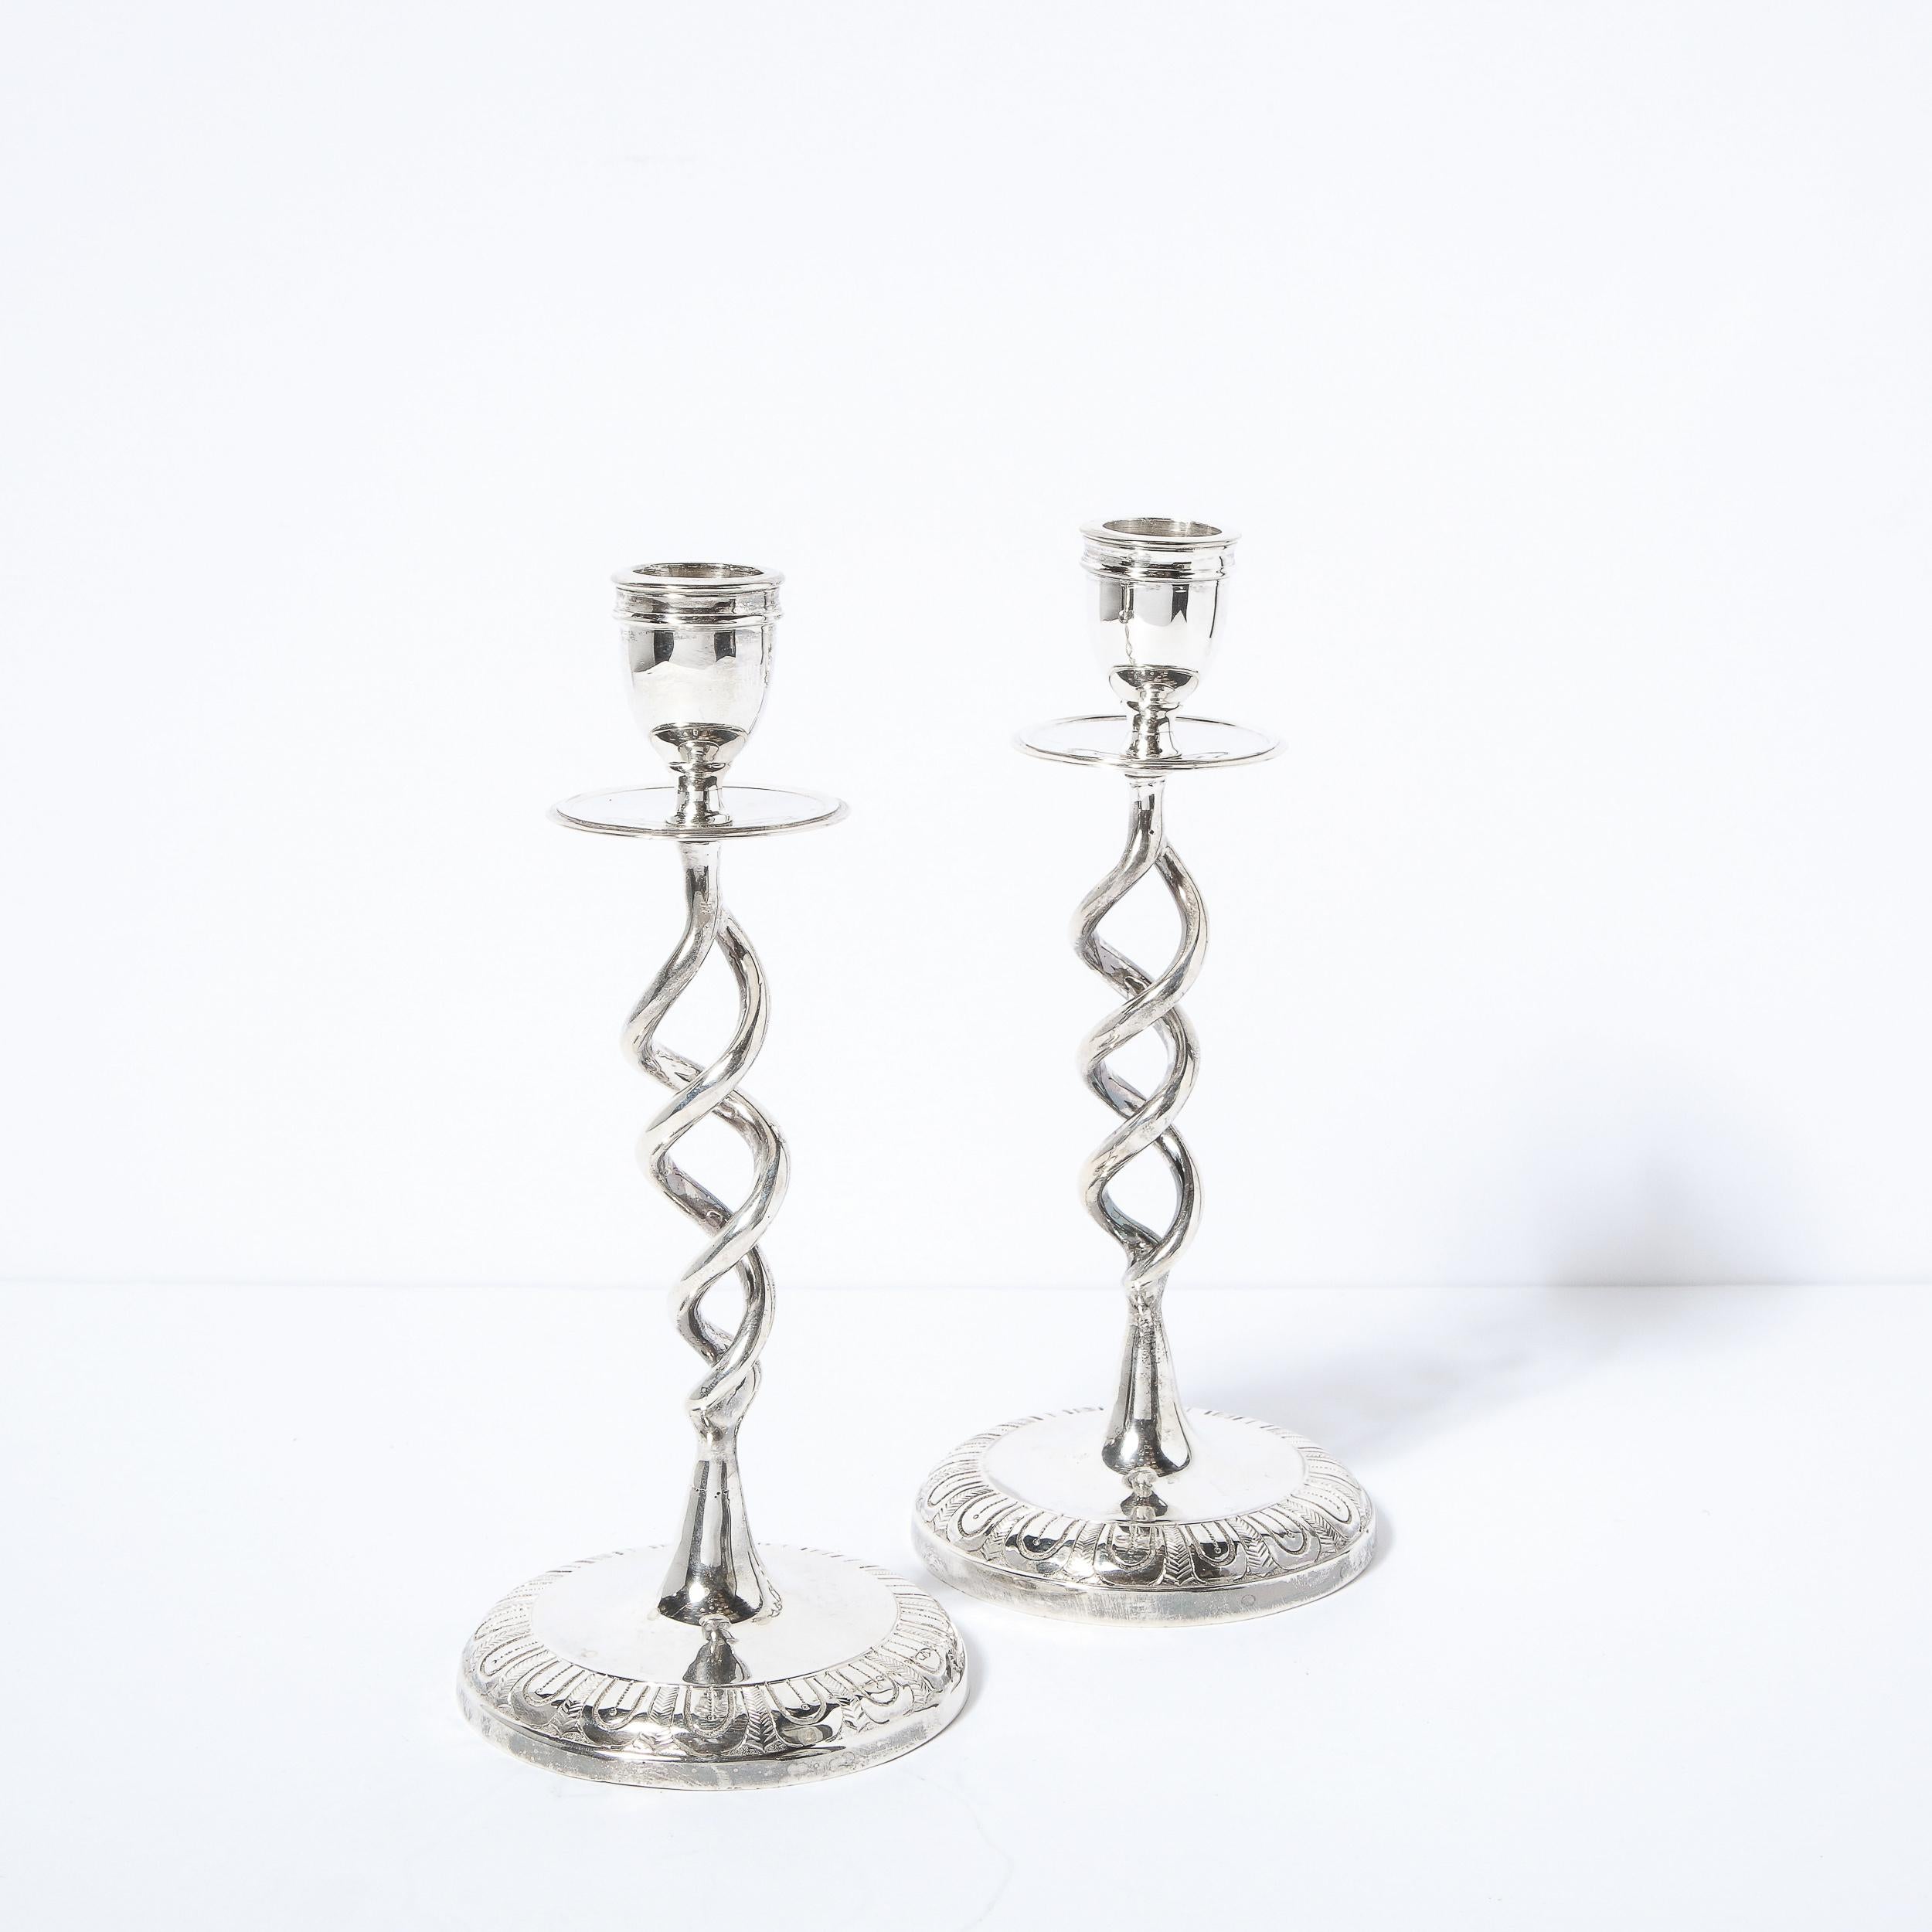 Pair of British Mid-Century Modern Nickel Helix Form Candle Holders In Excellent Condition For Sale In New York, NY